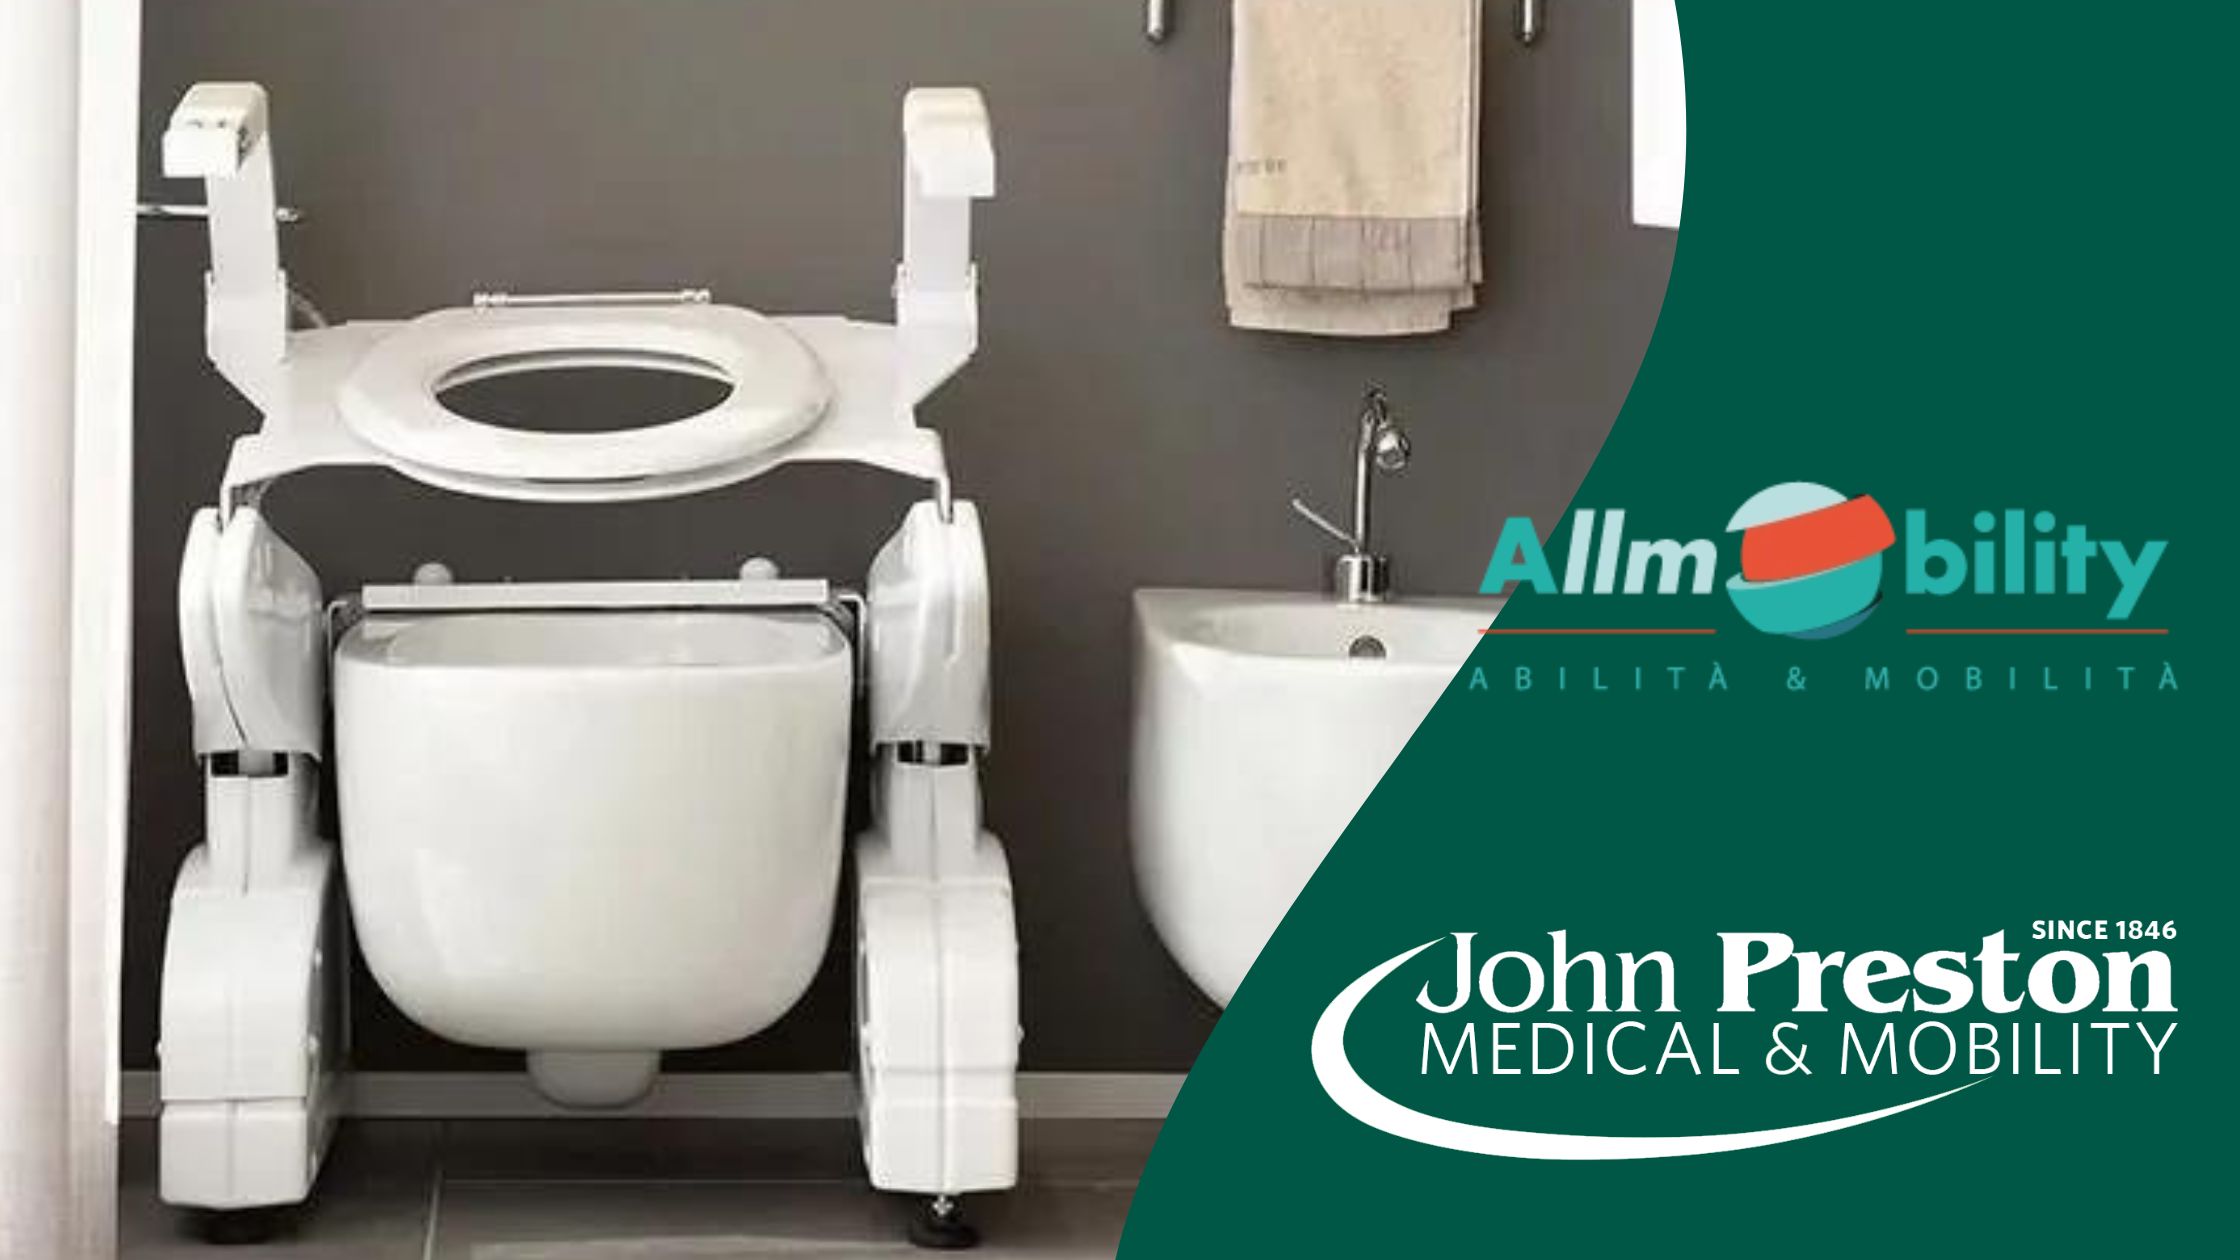 Introducing AllMobility: Bathing & Toileting Equipment